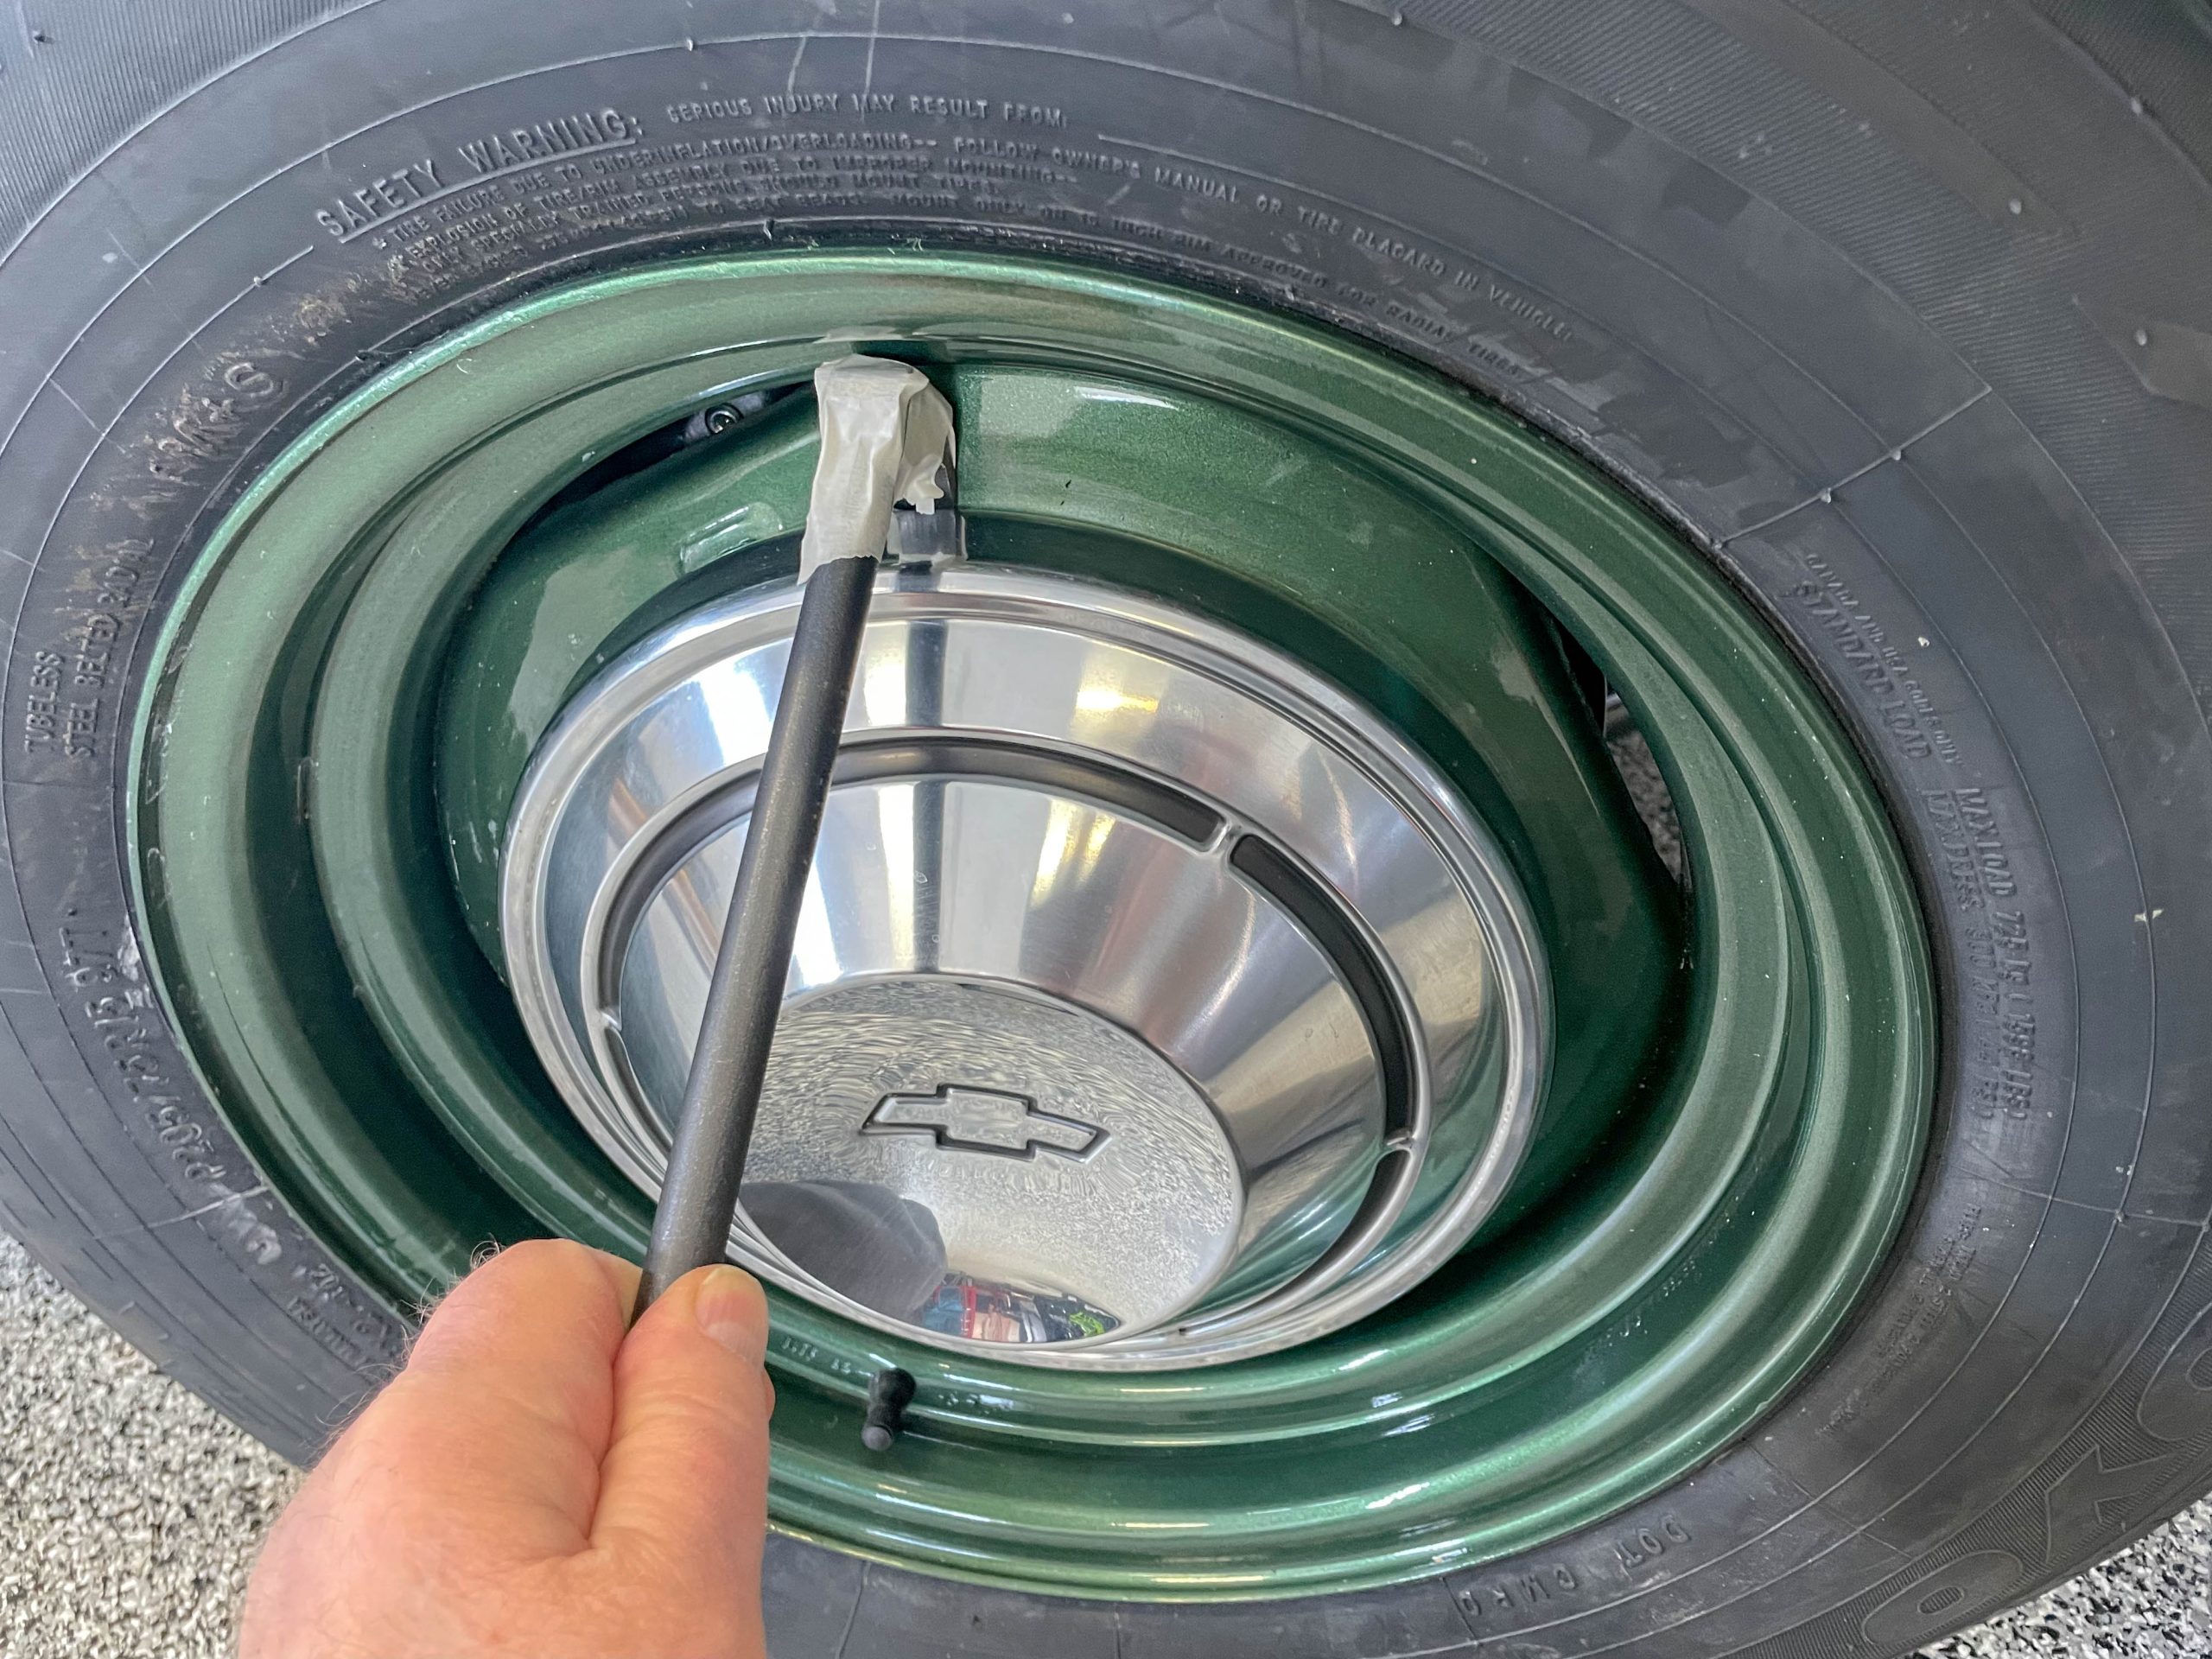 rolling-head-pry-bar-removing-a-hubcap-on-an-old-wheel-scaled.jpg